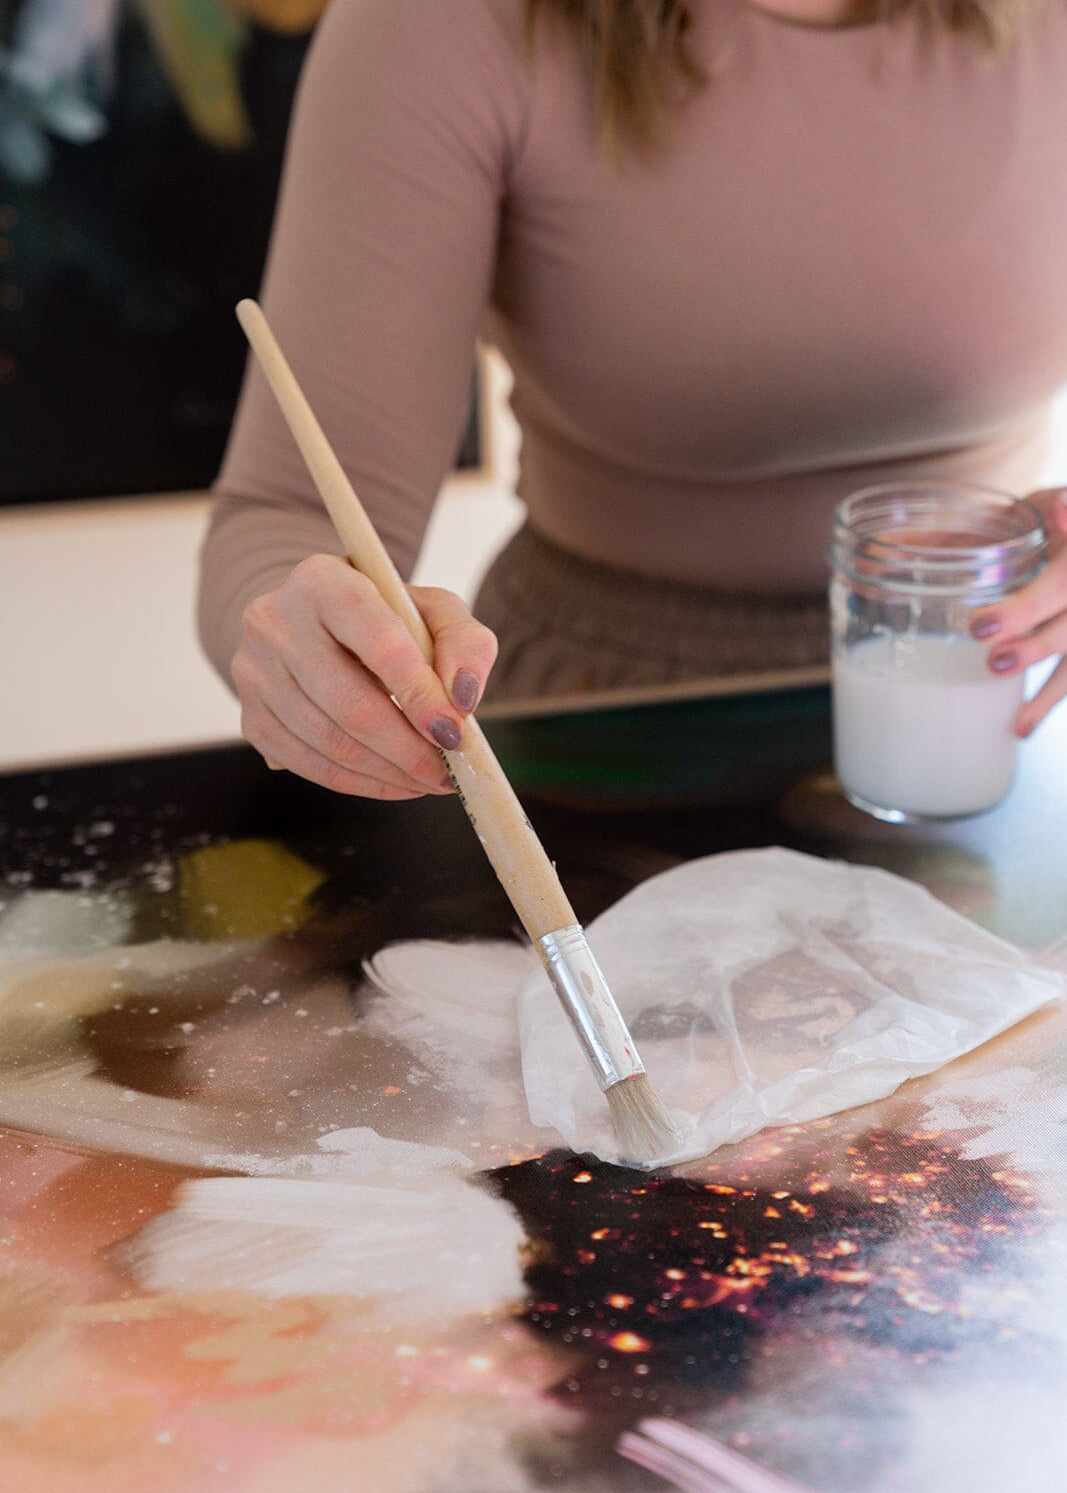 Podcast #1 - How to Ignite more Creativity in your Art Practice